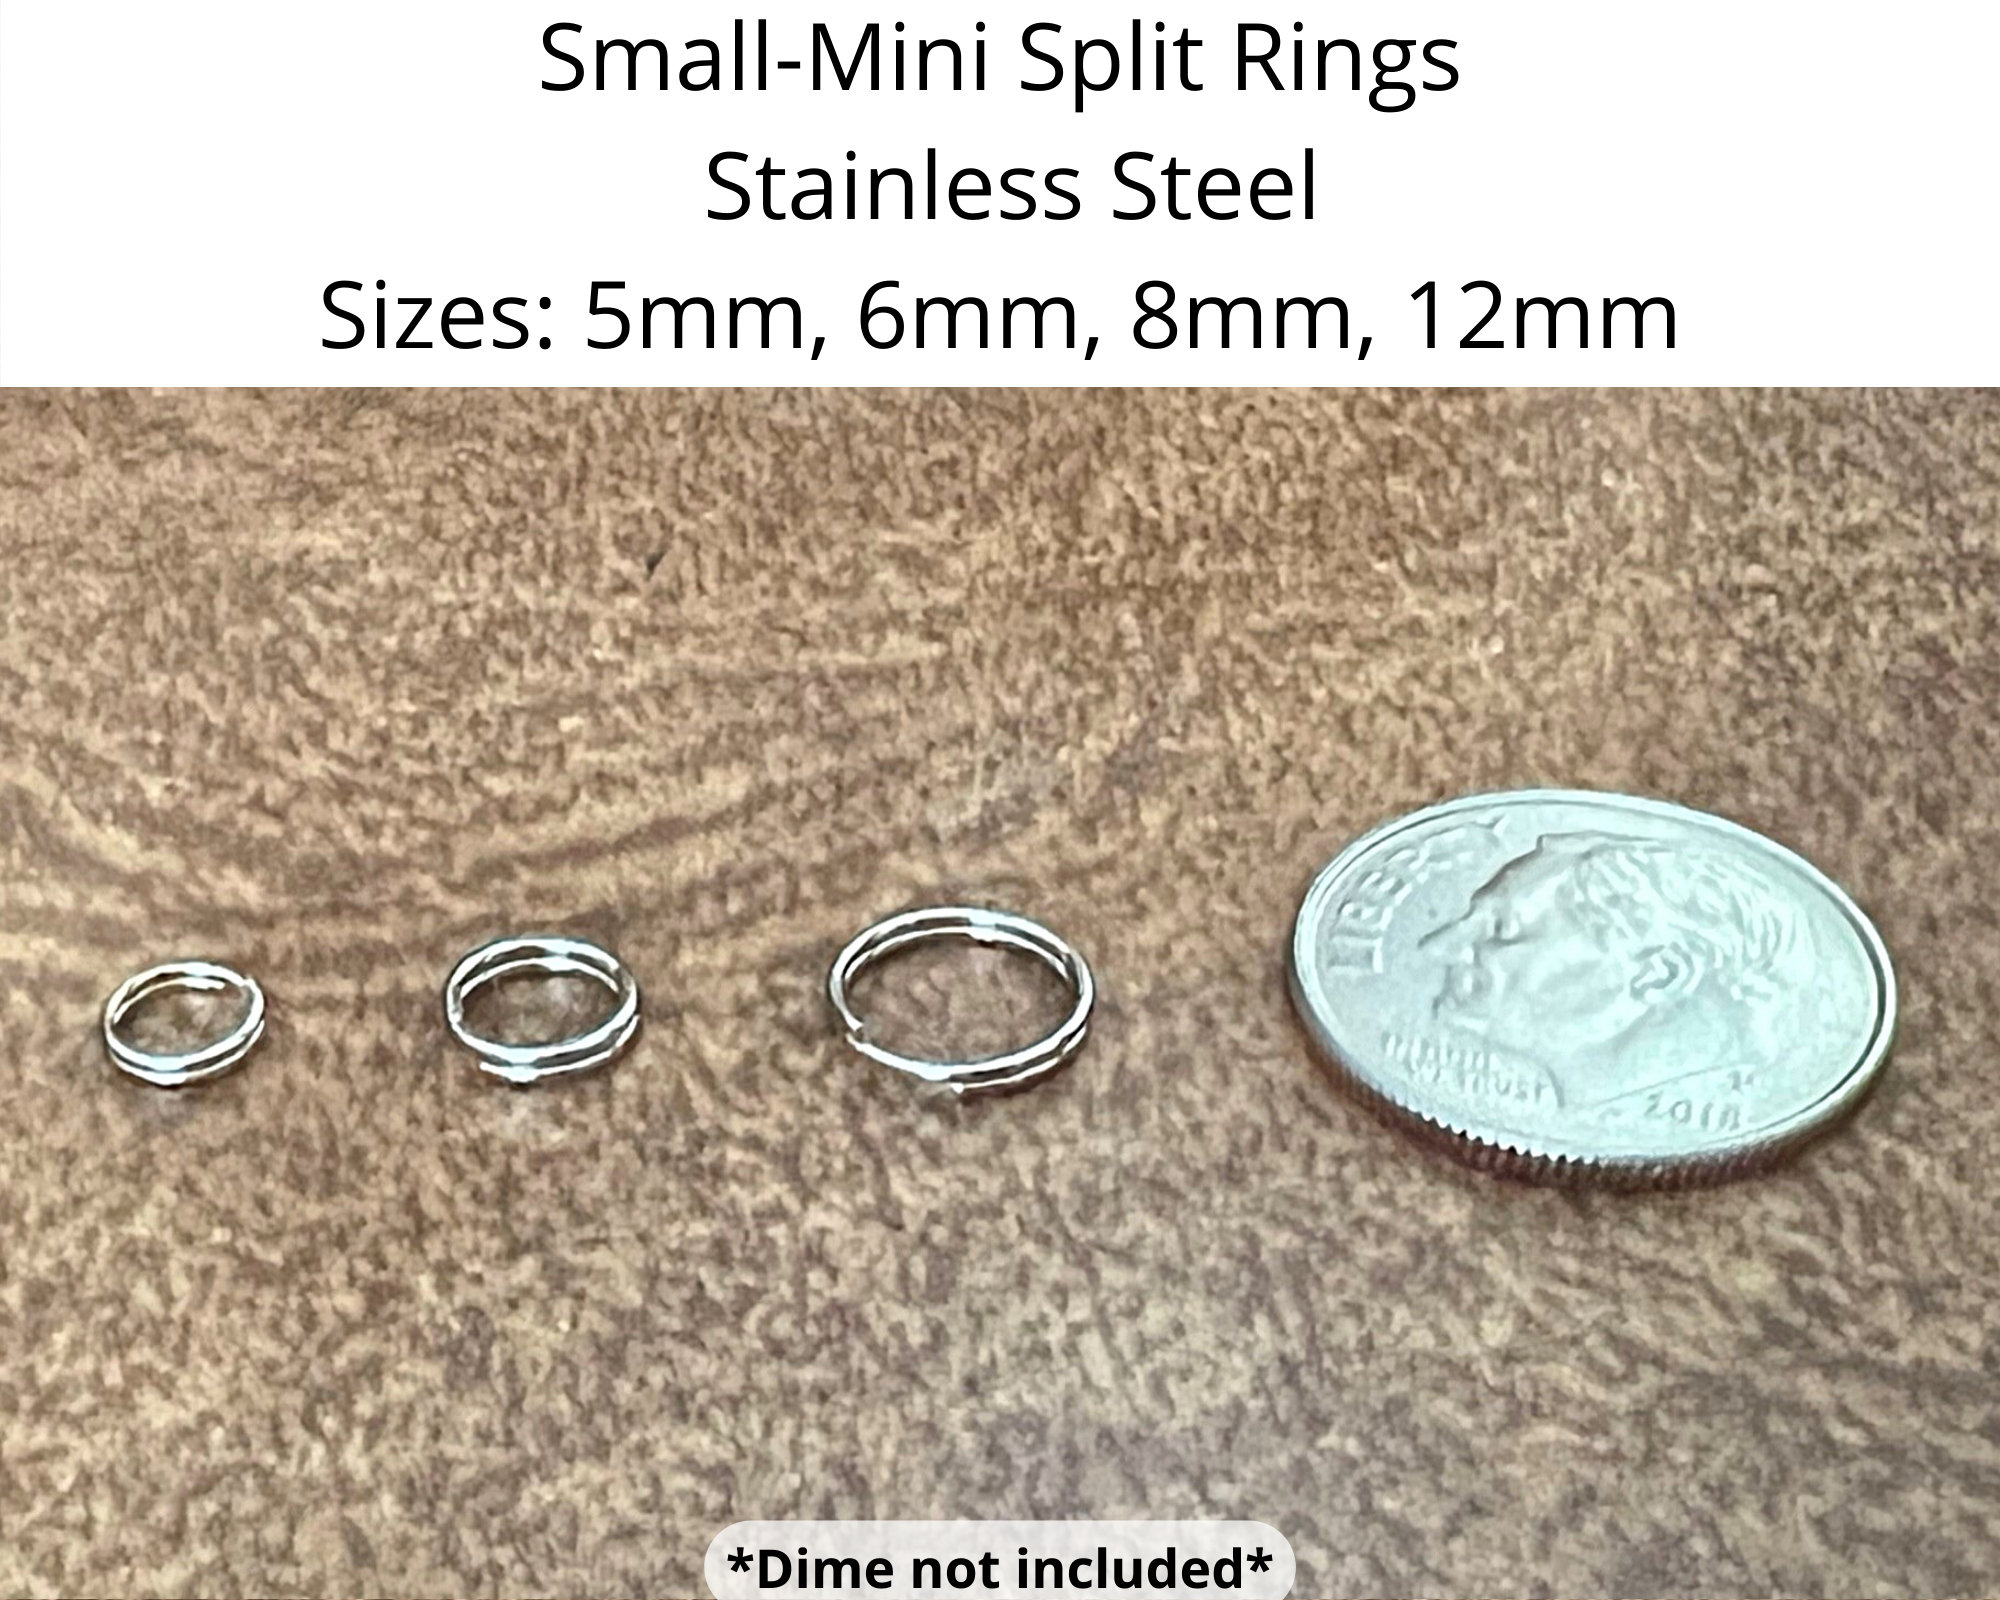 10, 25, or 50 Mini Split Rings, Size 5mm 6mm 8mm 12mm, Stainless Steel,  Tarnish Resistant, Small Keychain Ring, DIY Secure Charms/pendants, 